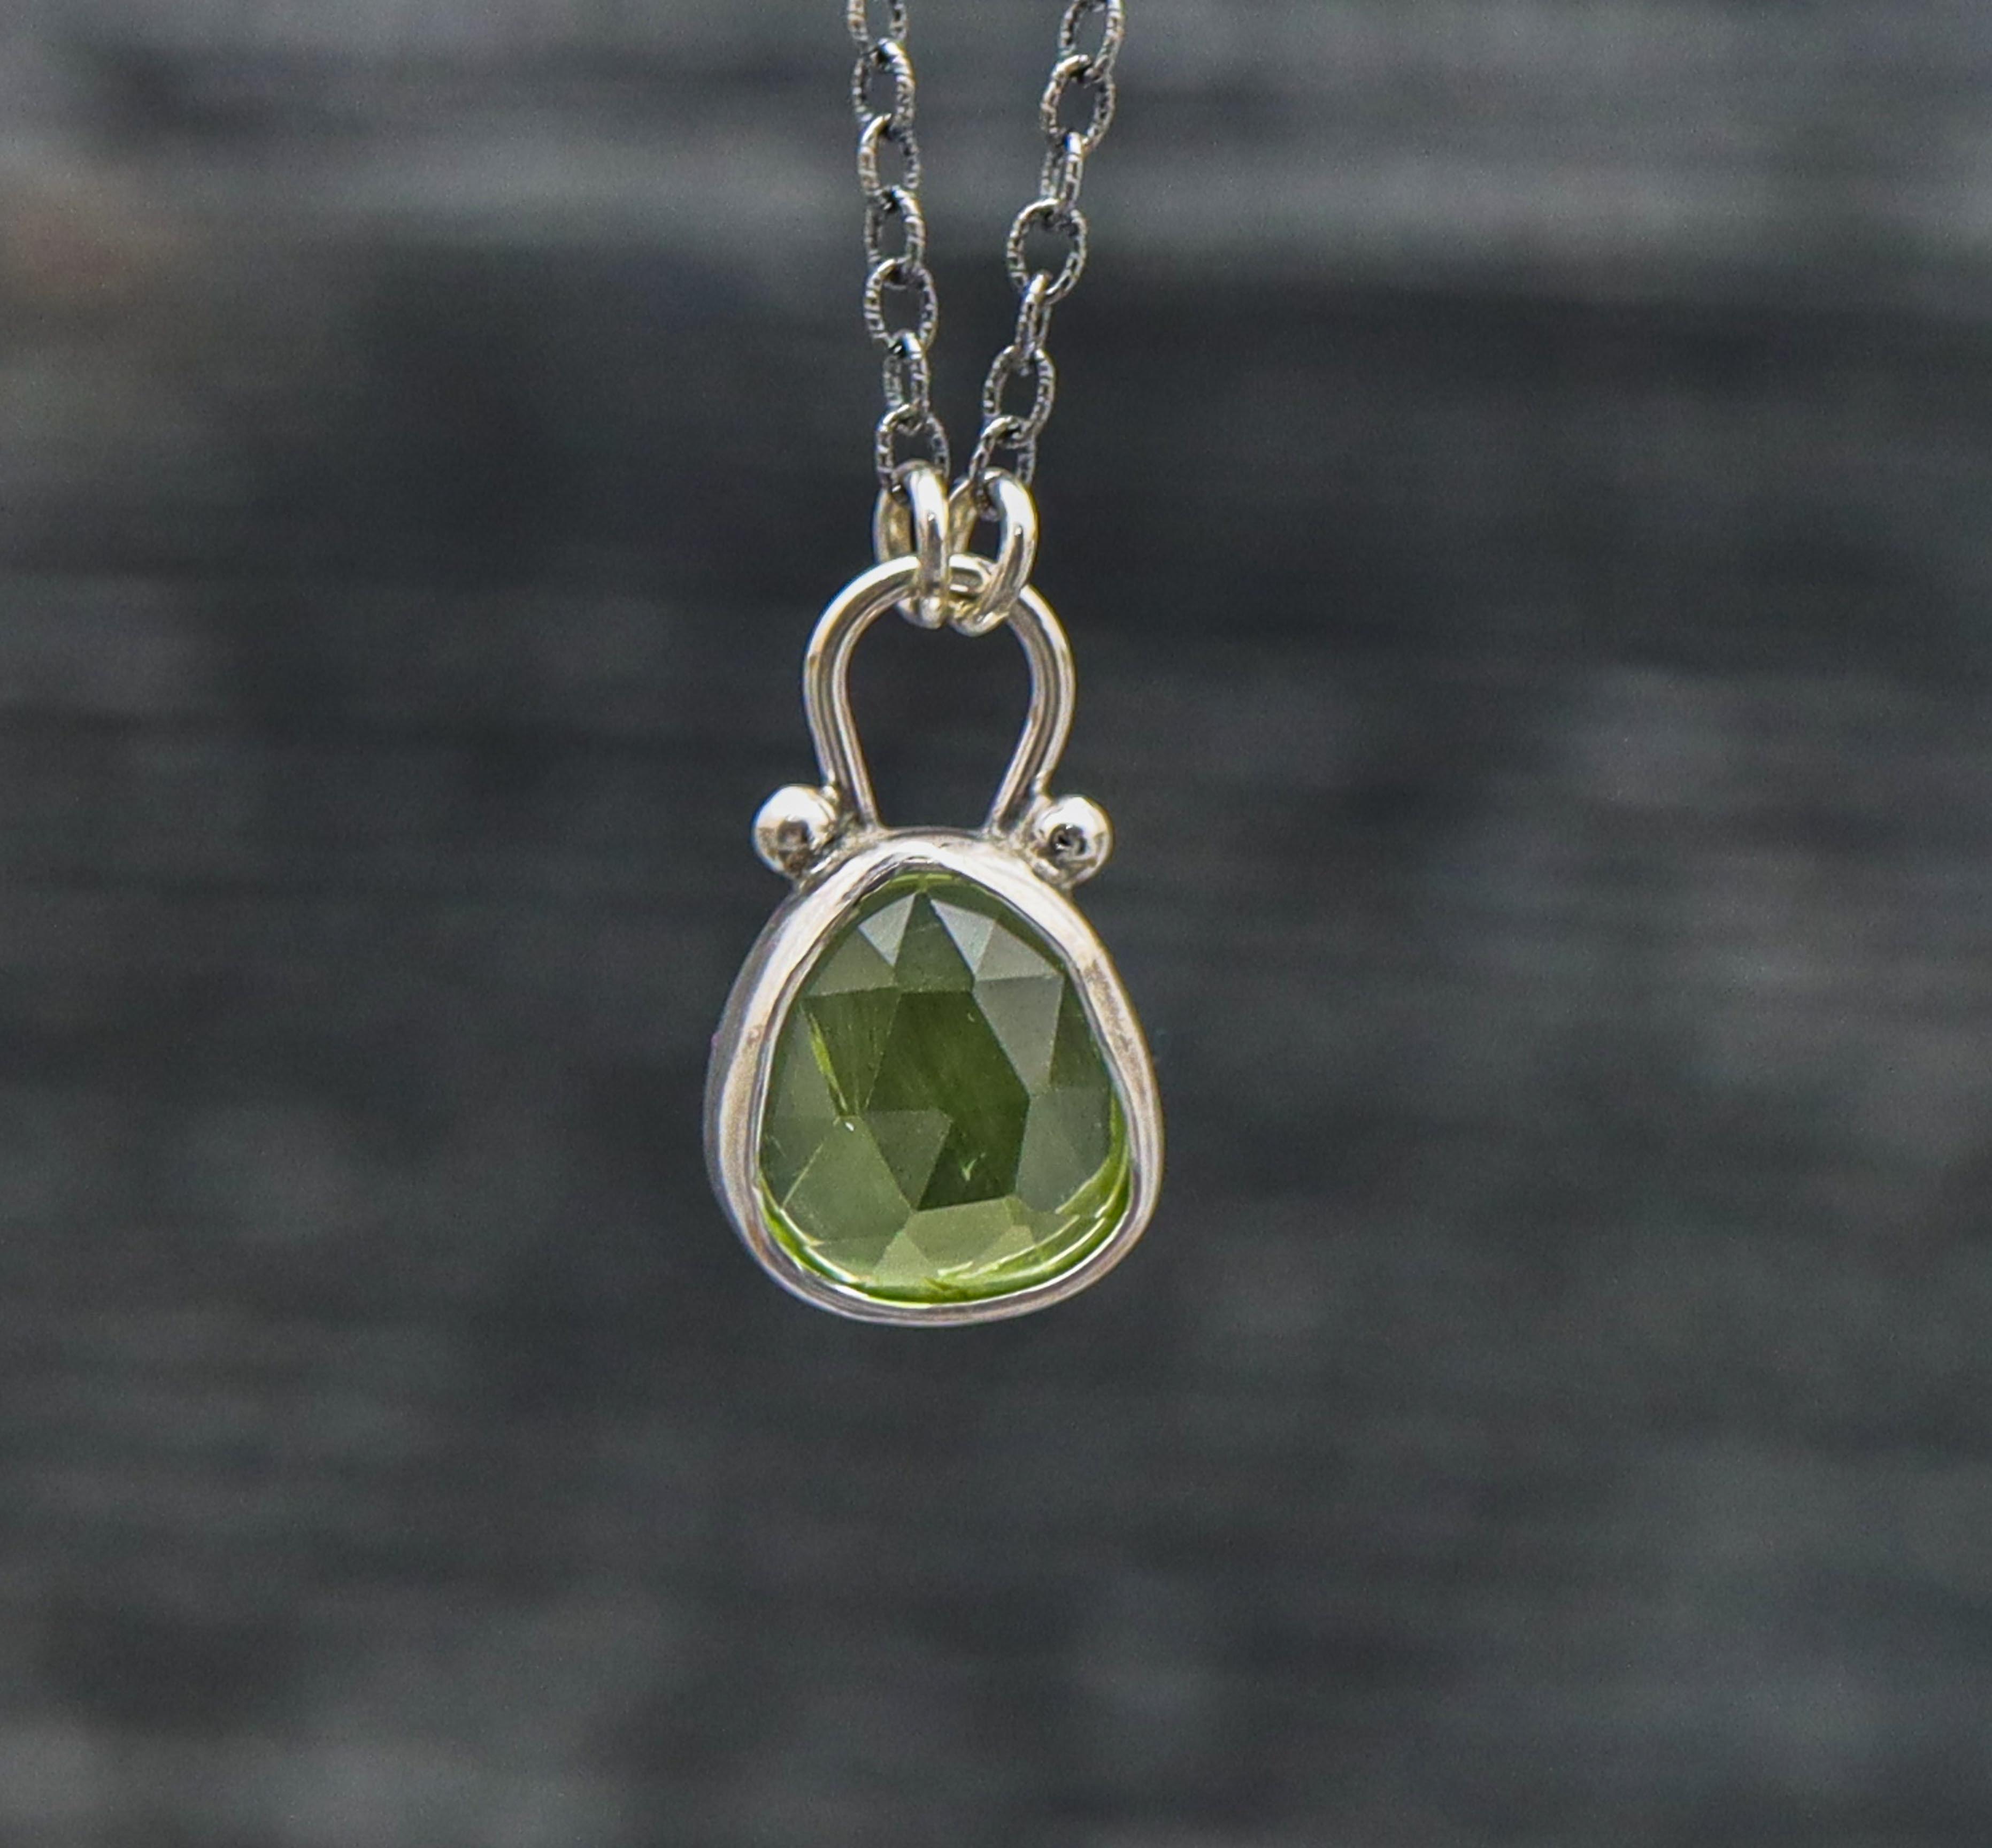 Green Peridot Pendant Necklace Sterling Silver